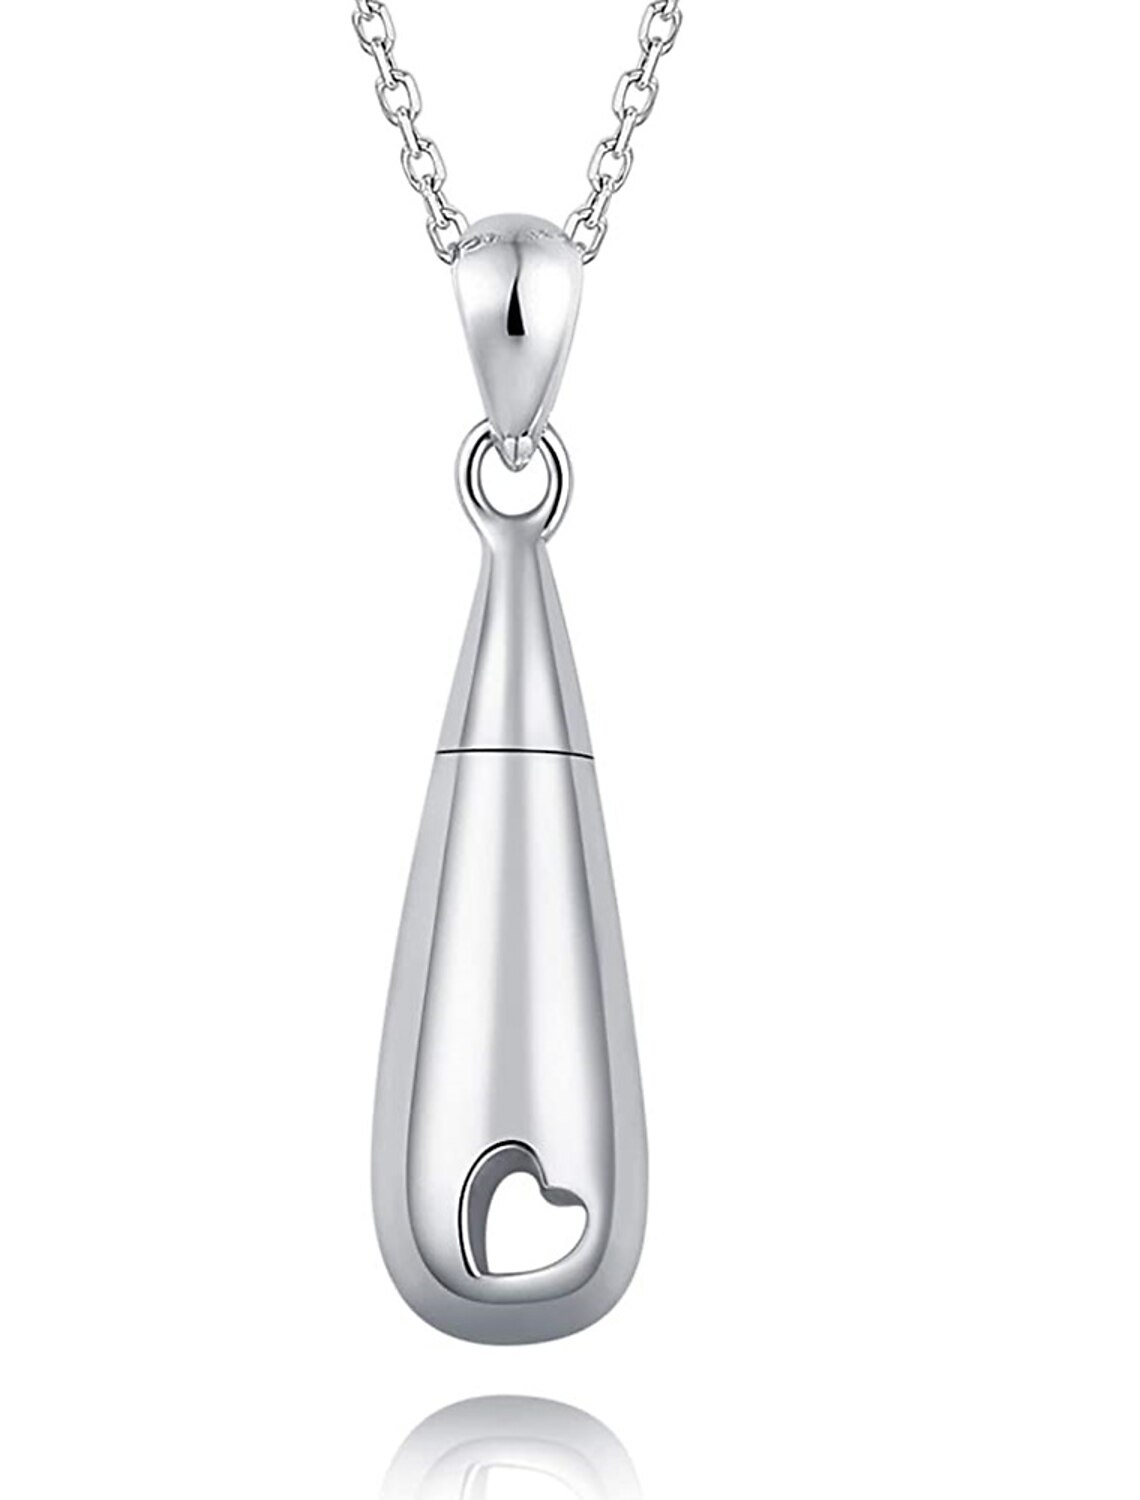 WK Teardrop Stainless Steel Always in My Heart Cremation Urn Necklace Pendant with Fill Kit Ashes Jewelry